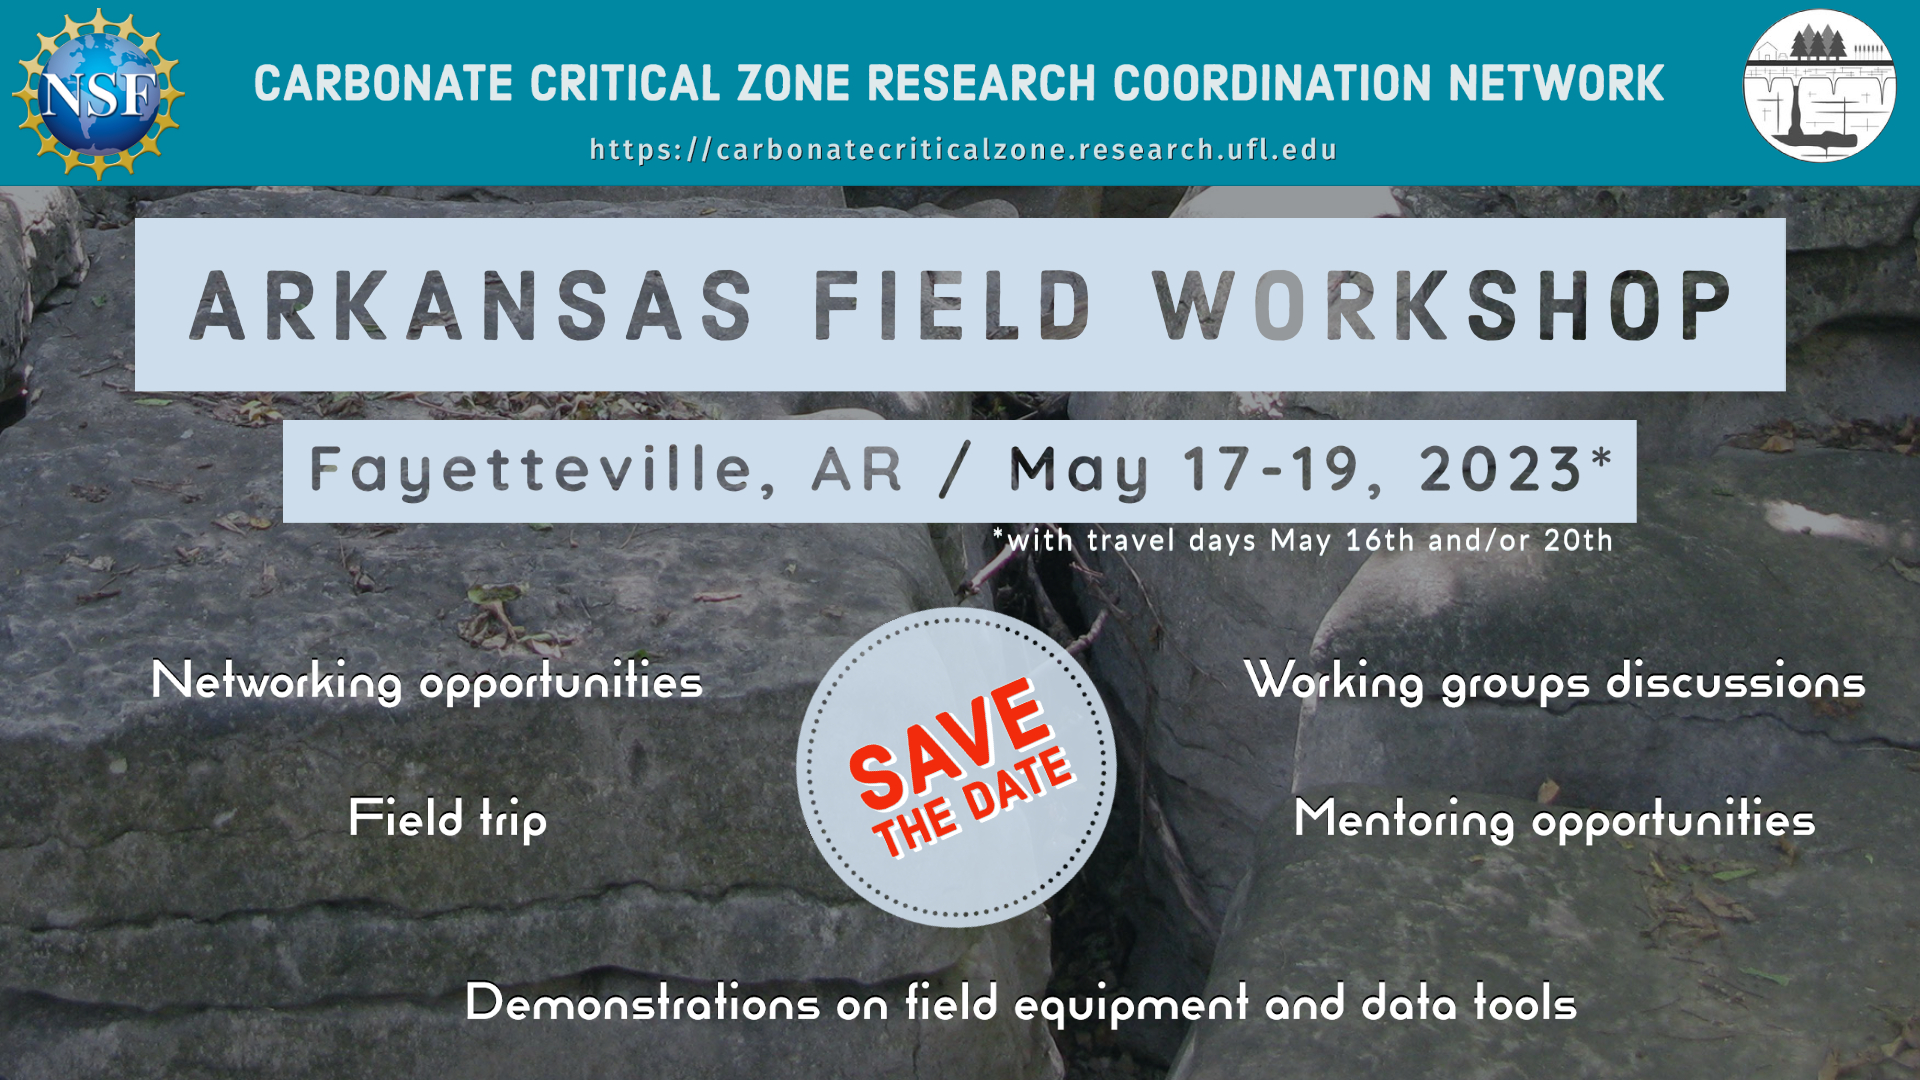 Save the date! Arkansas field WORKSHOP. Fayetteville, AR / May 17-19, 2023 (with travel days May 16th and/or 20th). Networking opportunities. Working groups discussions. Field trip. Mentoring opportunities. Demonstrations on field equipment and data tools